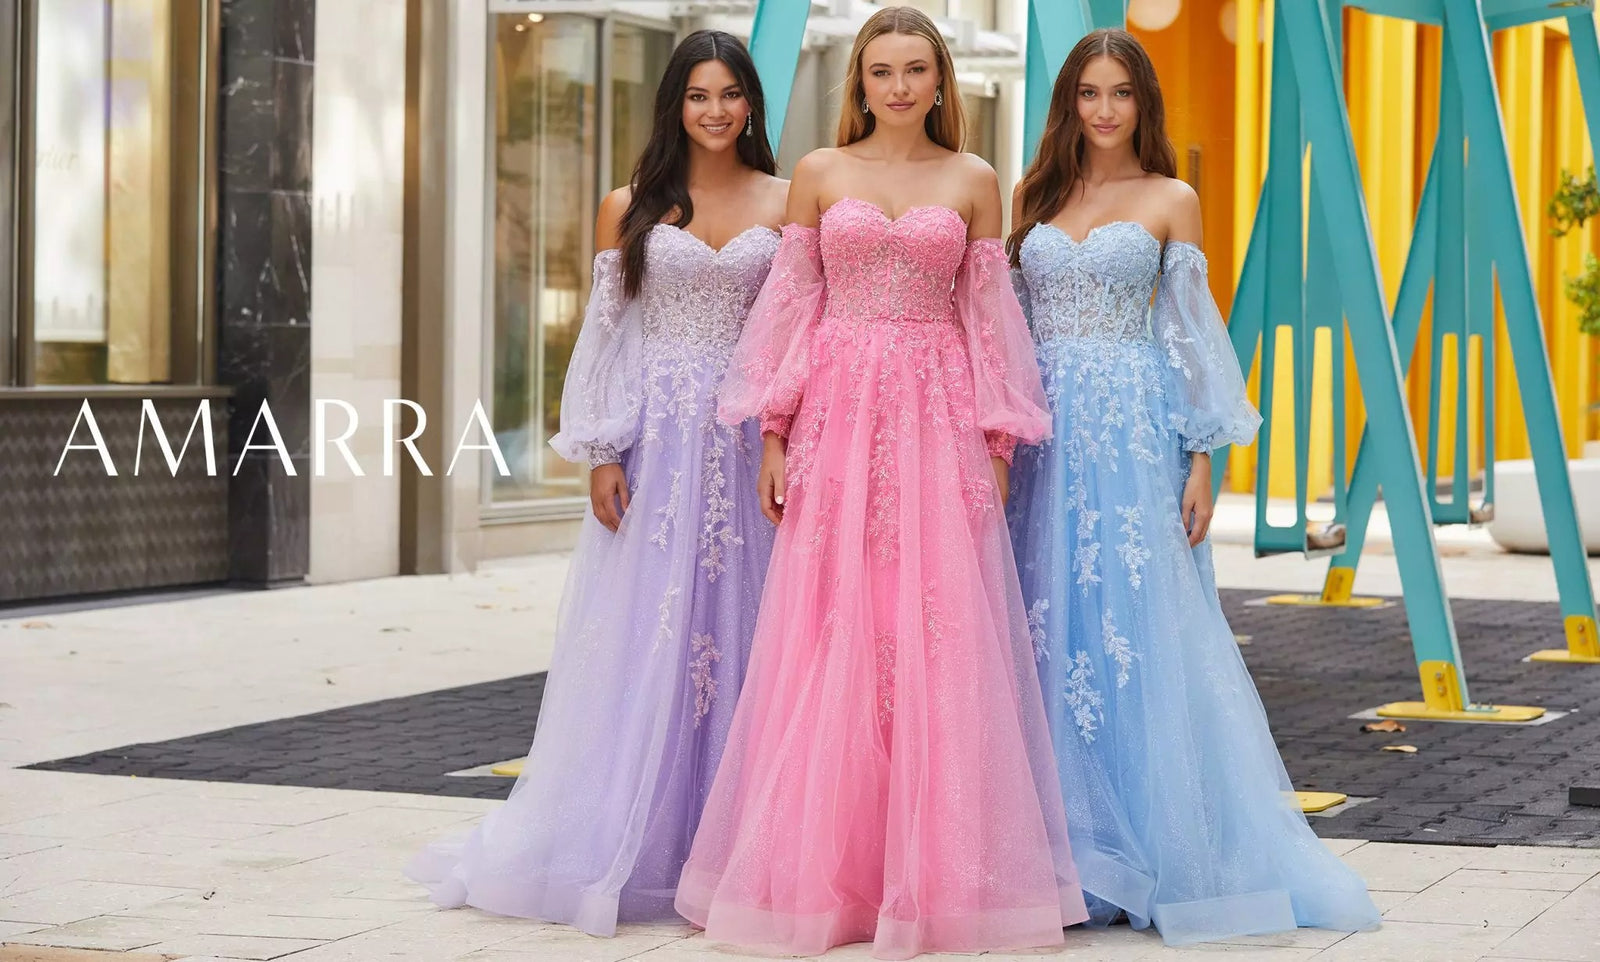 Prom Dresses: The Perfect Attire for an Unforgettable Night